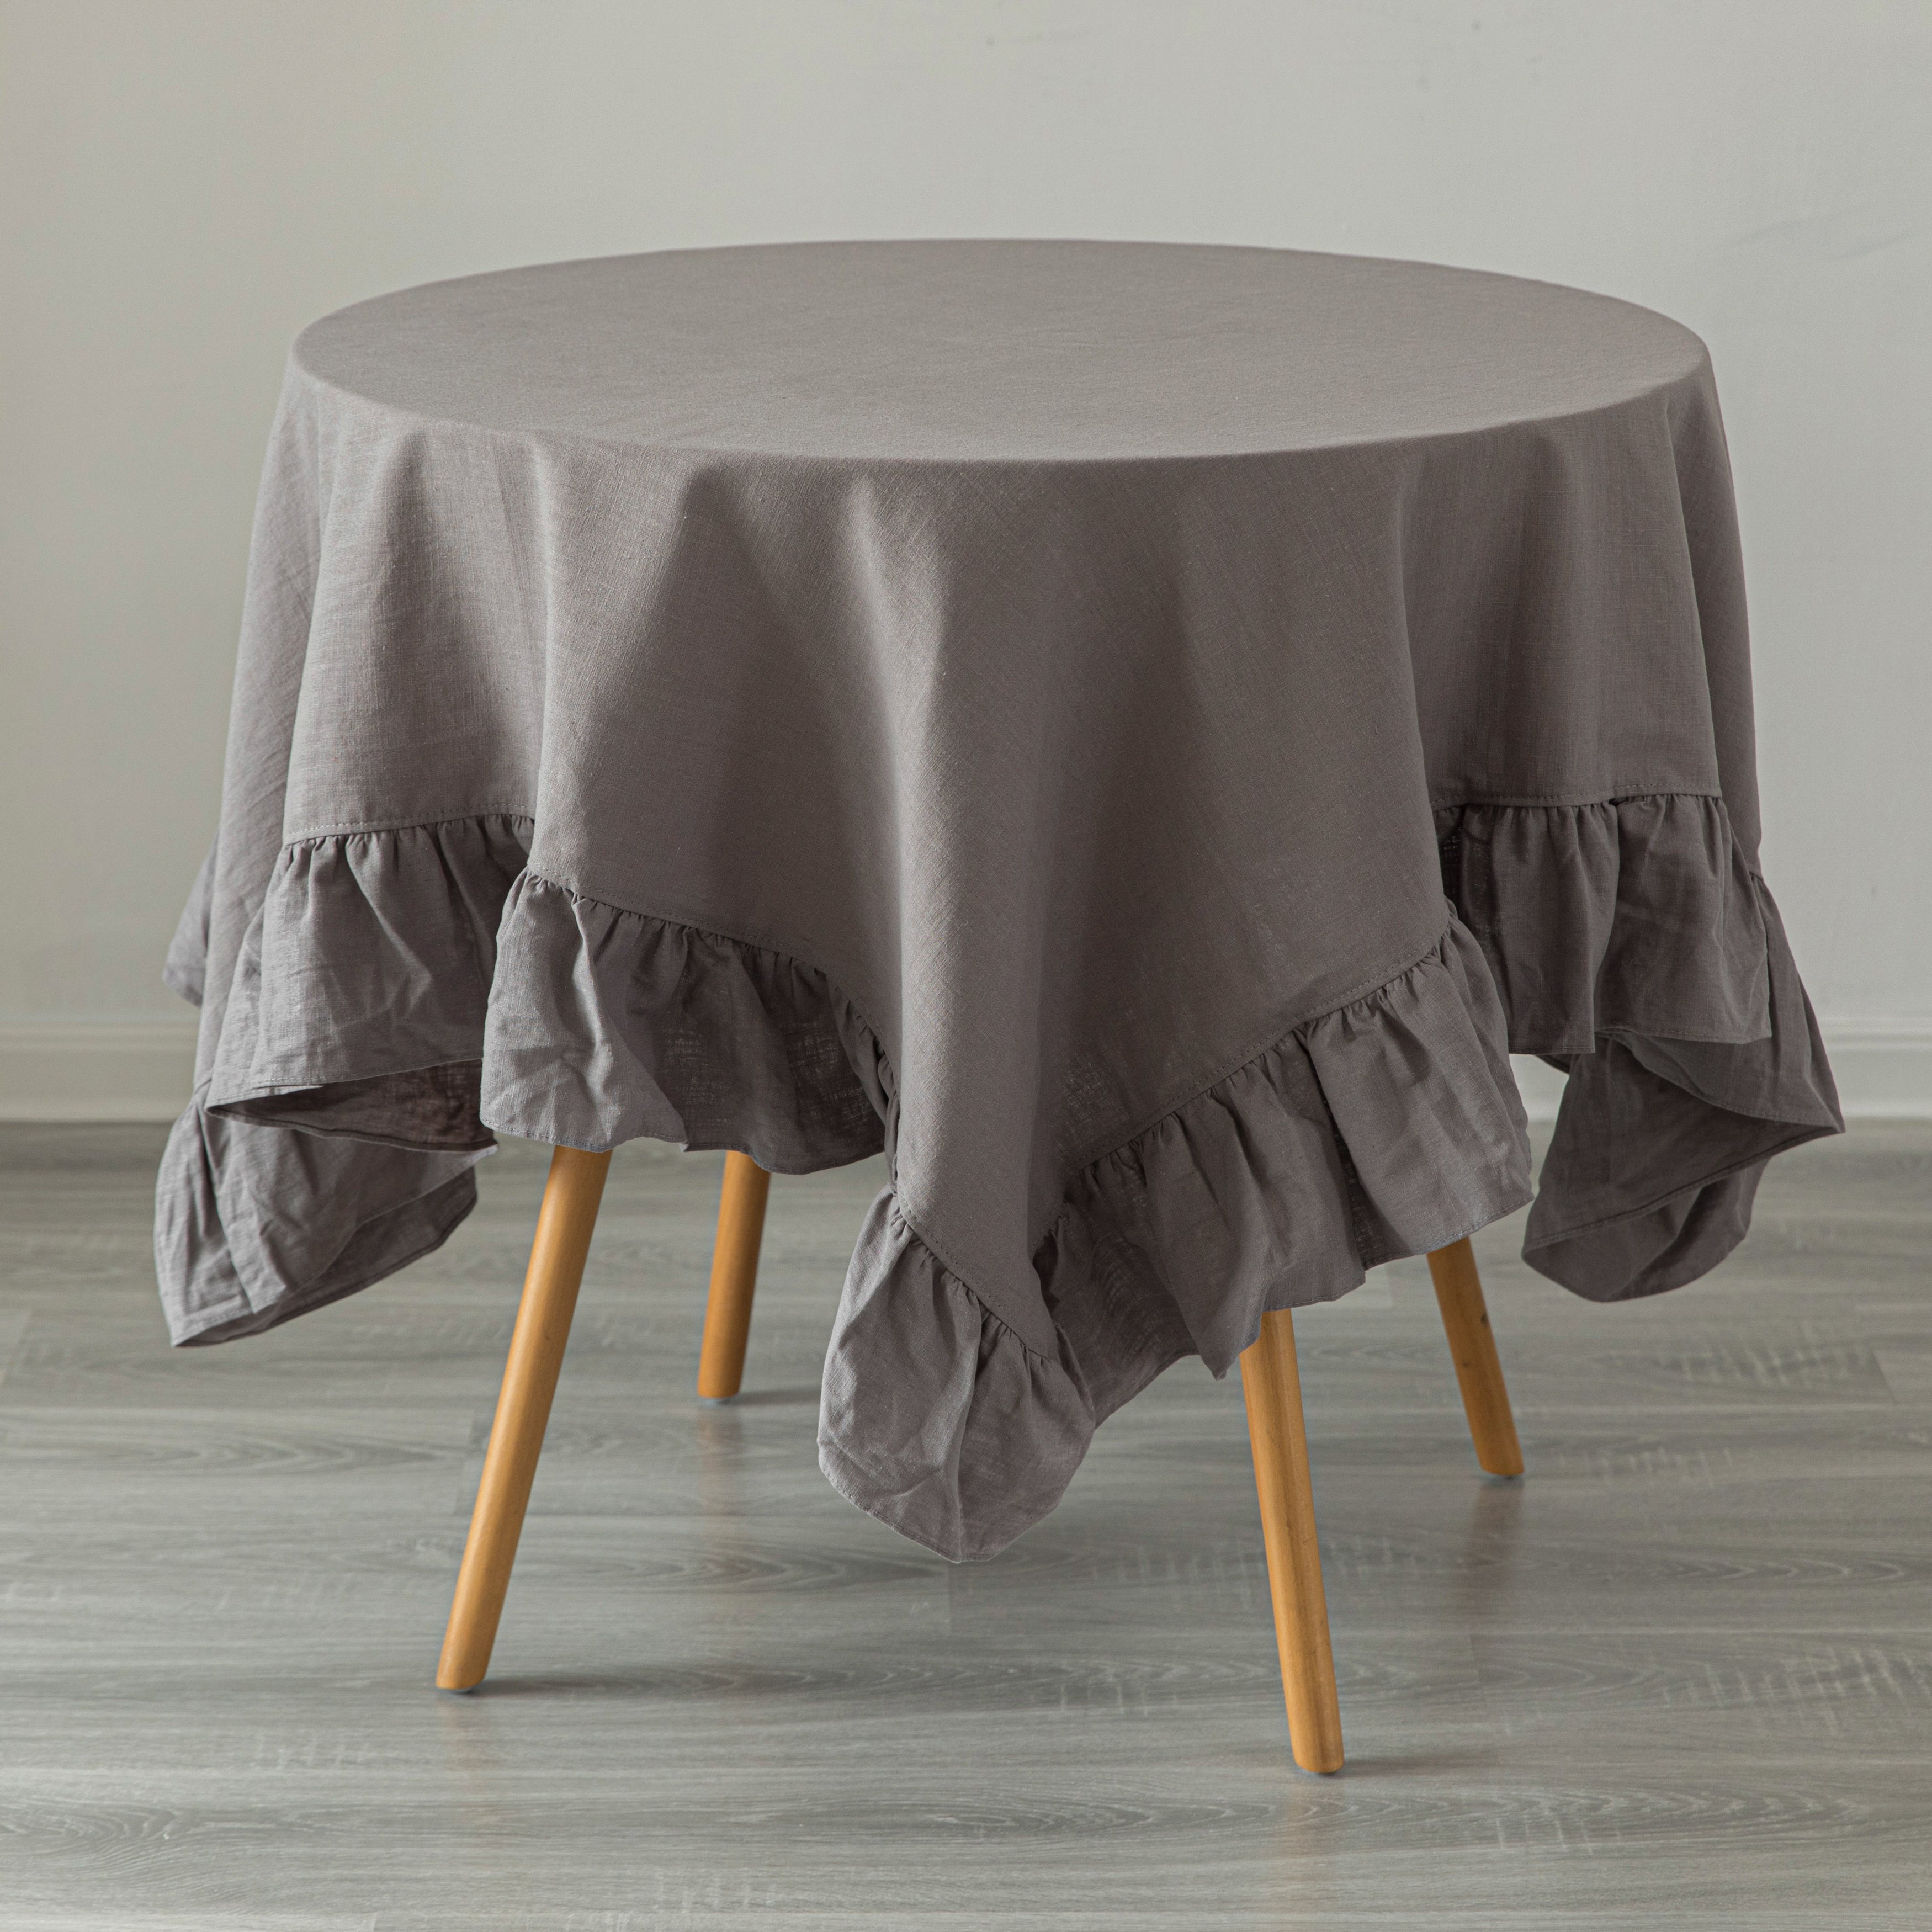 Deerlux 100 Percent Pure Linen Washable Tablecloth With Ruffle Trim - 60 X 80 In. Natural